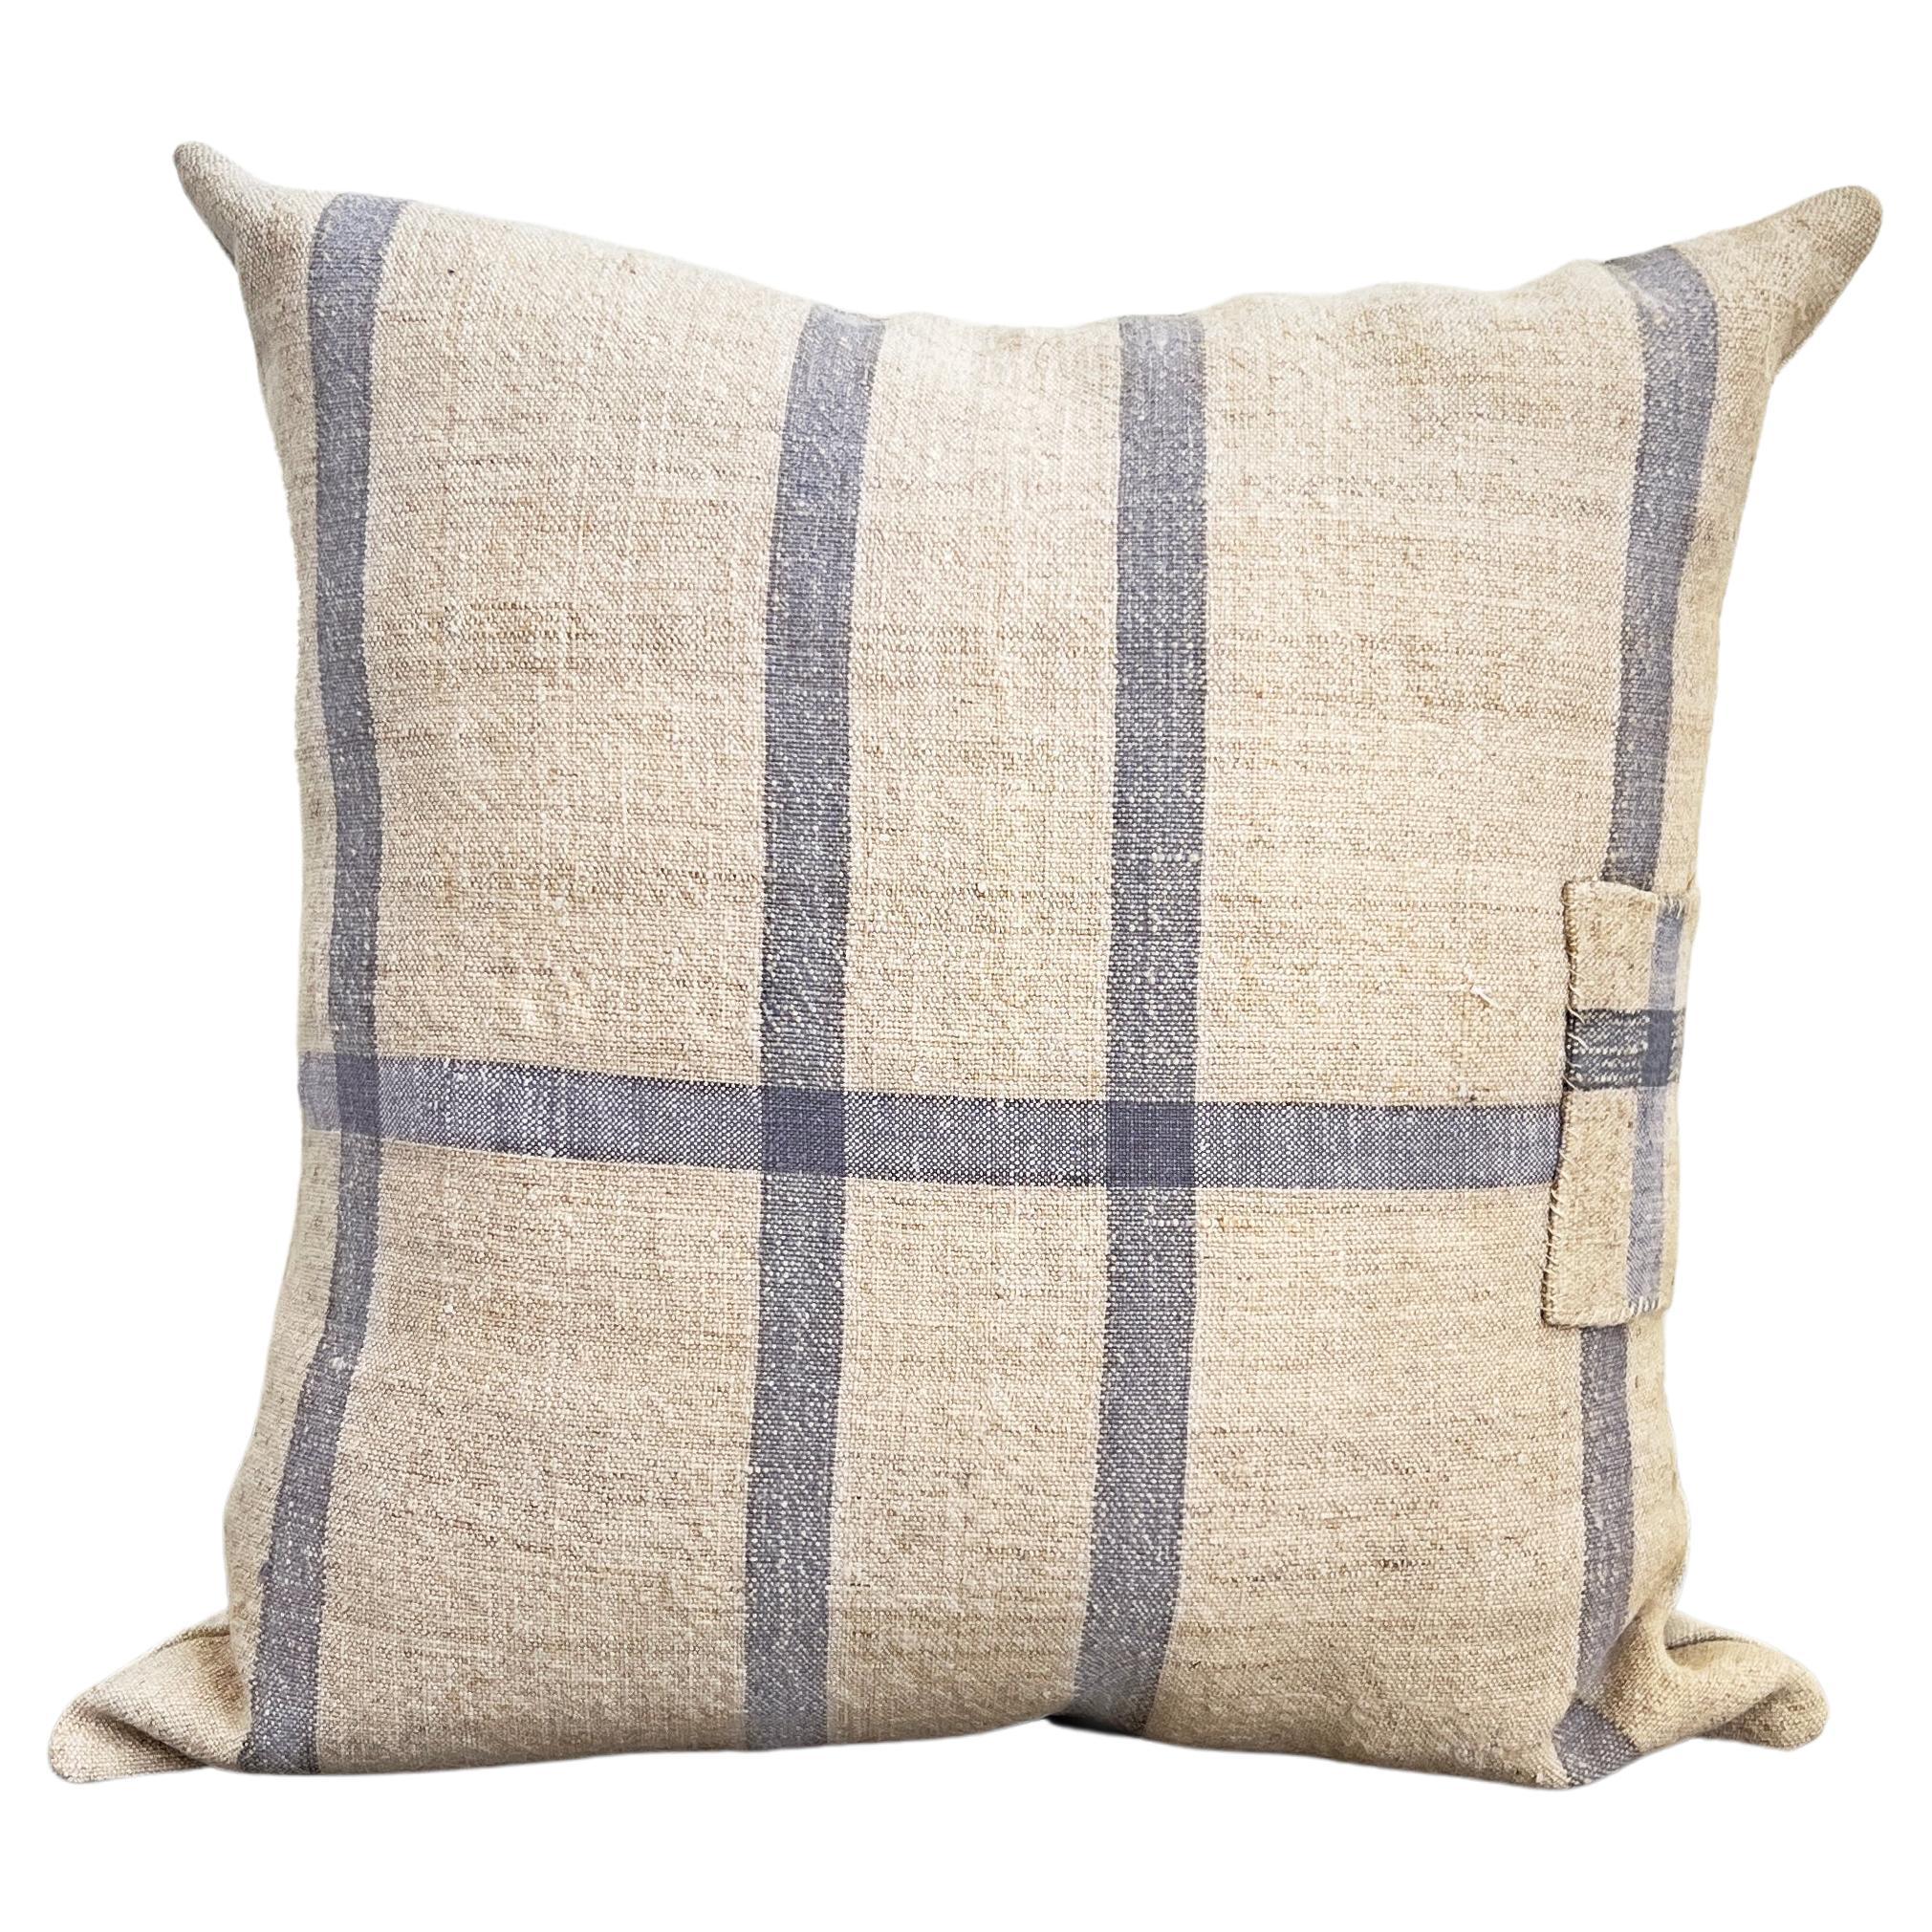 Matilde Blue Checkered Square Throw Pillow made from Vintage Linen